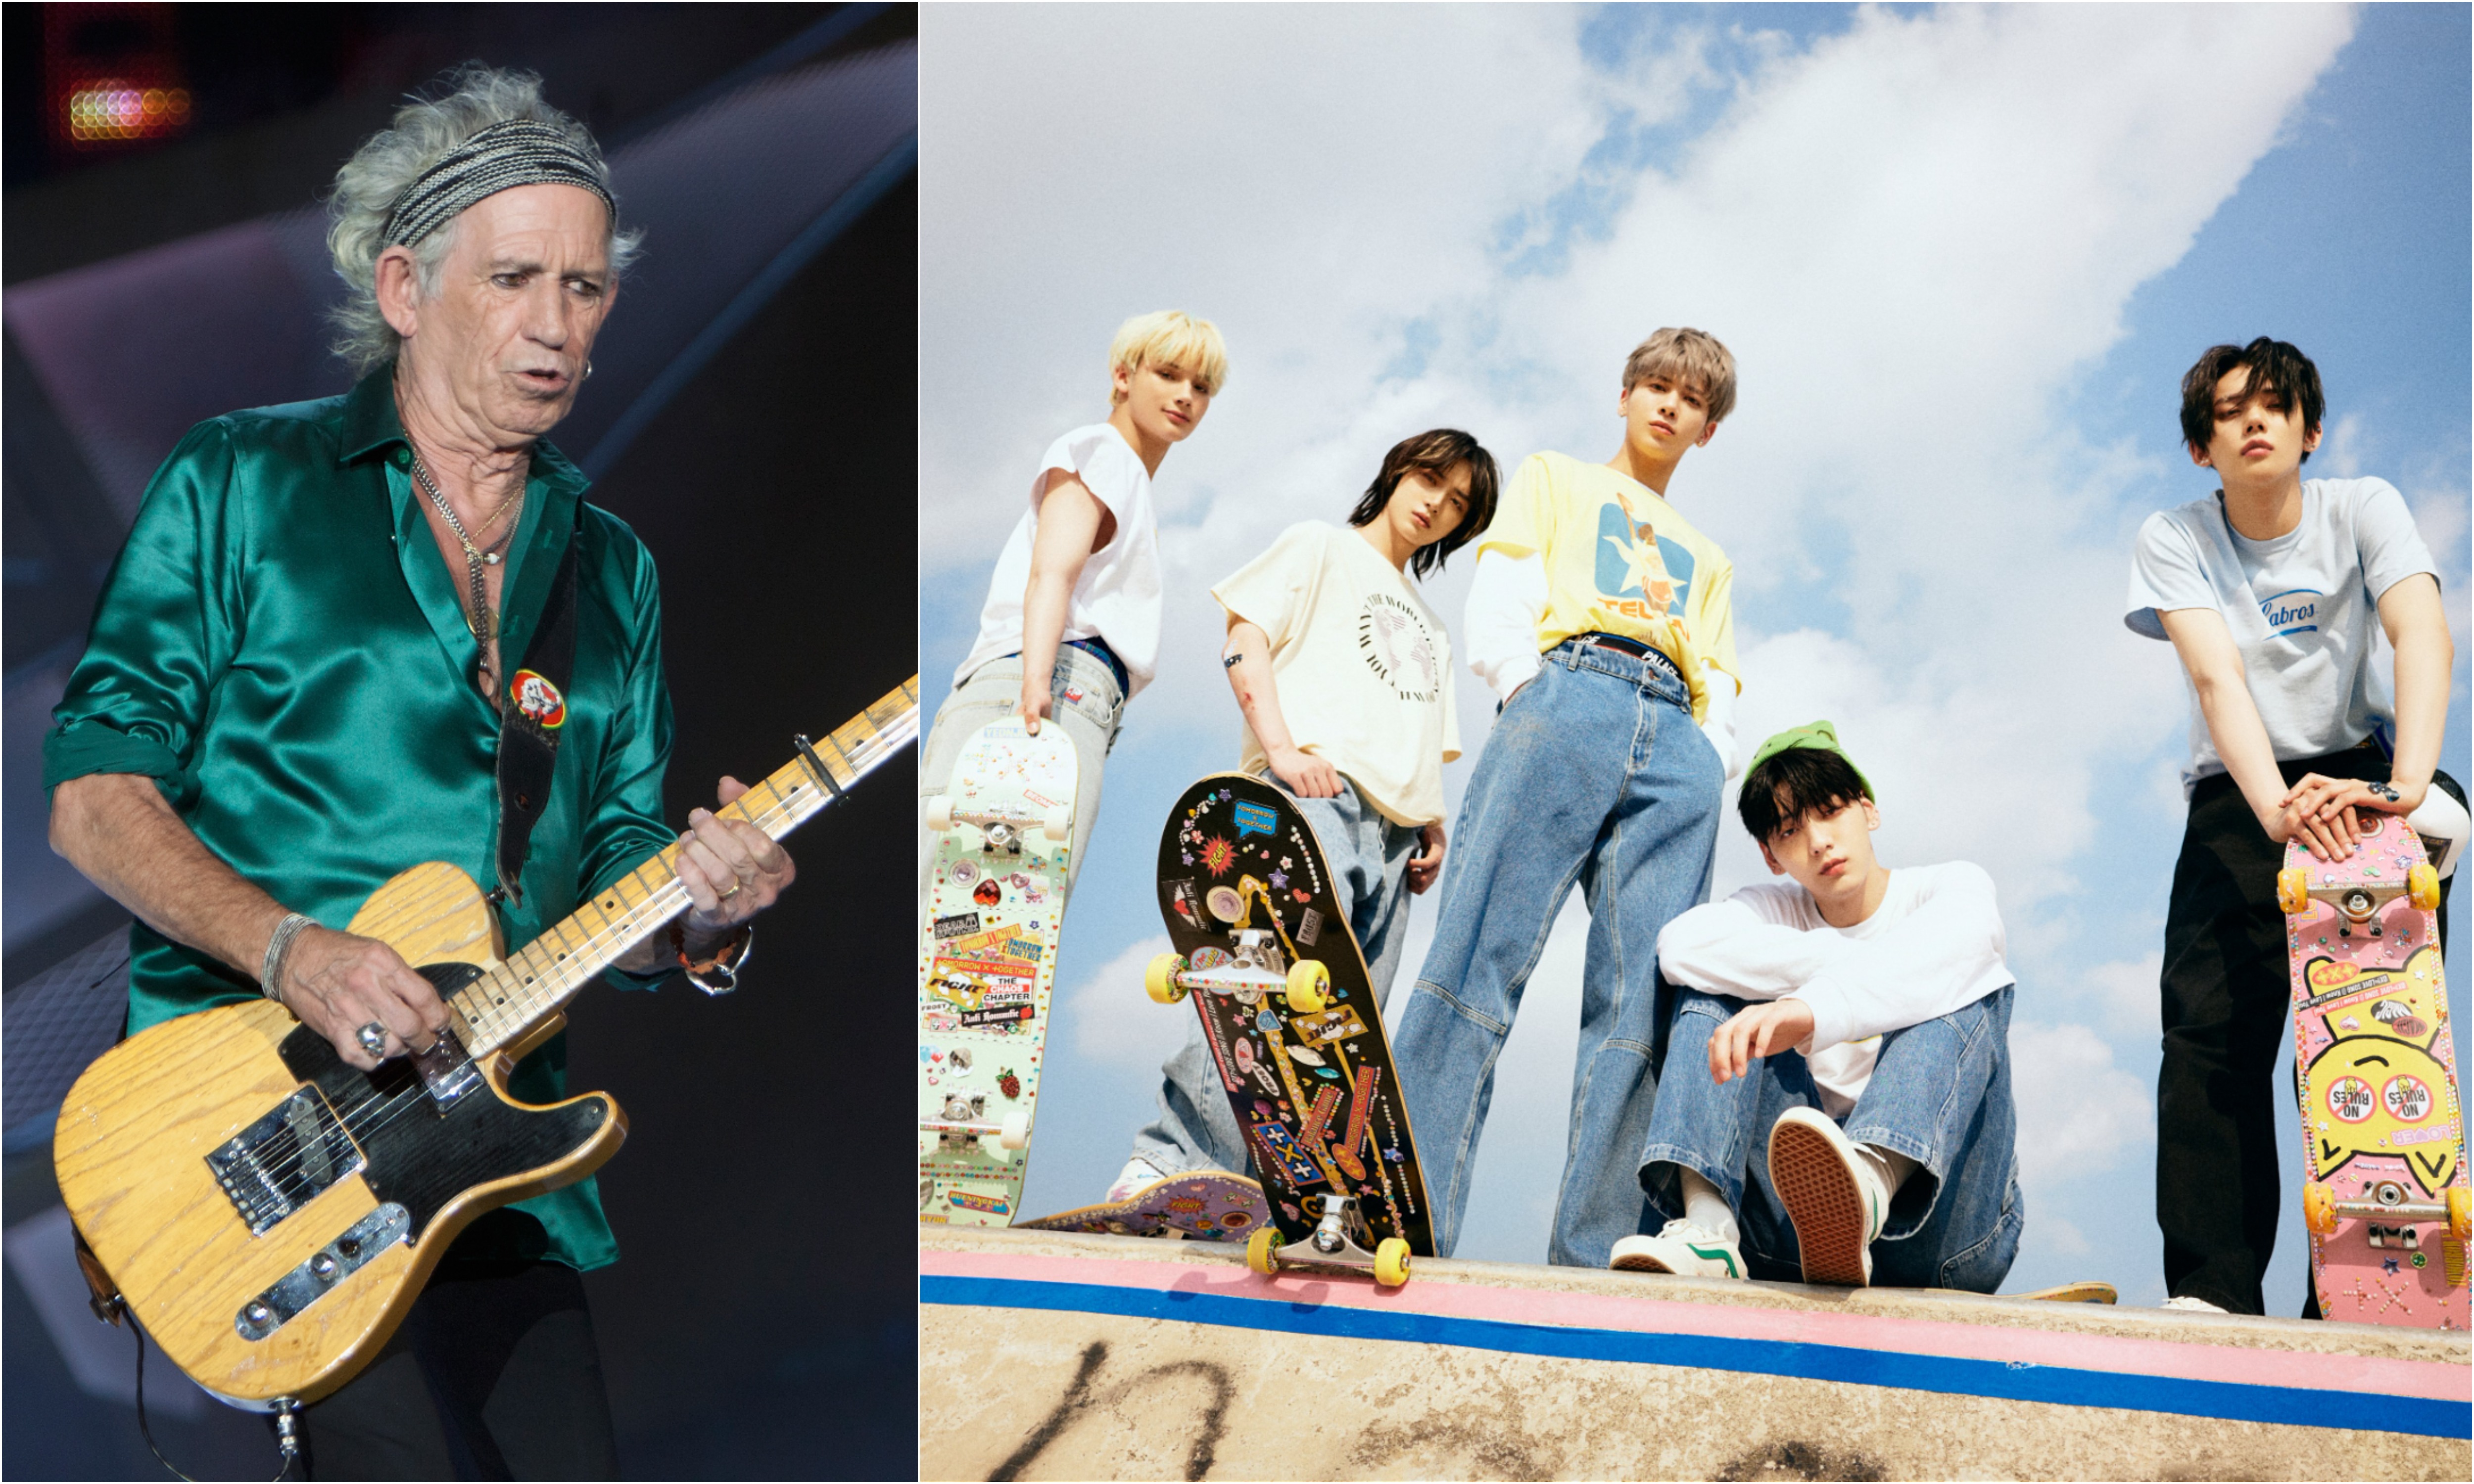 A joined photo of Keith Richards of the Rolling Stones and the members of the K-pop group TXT